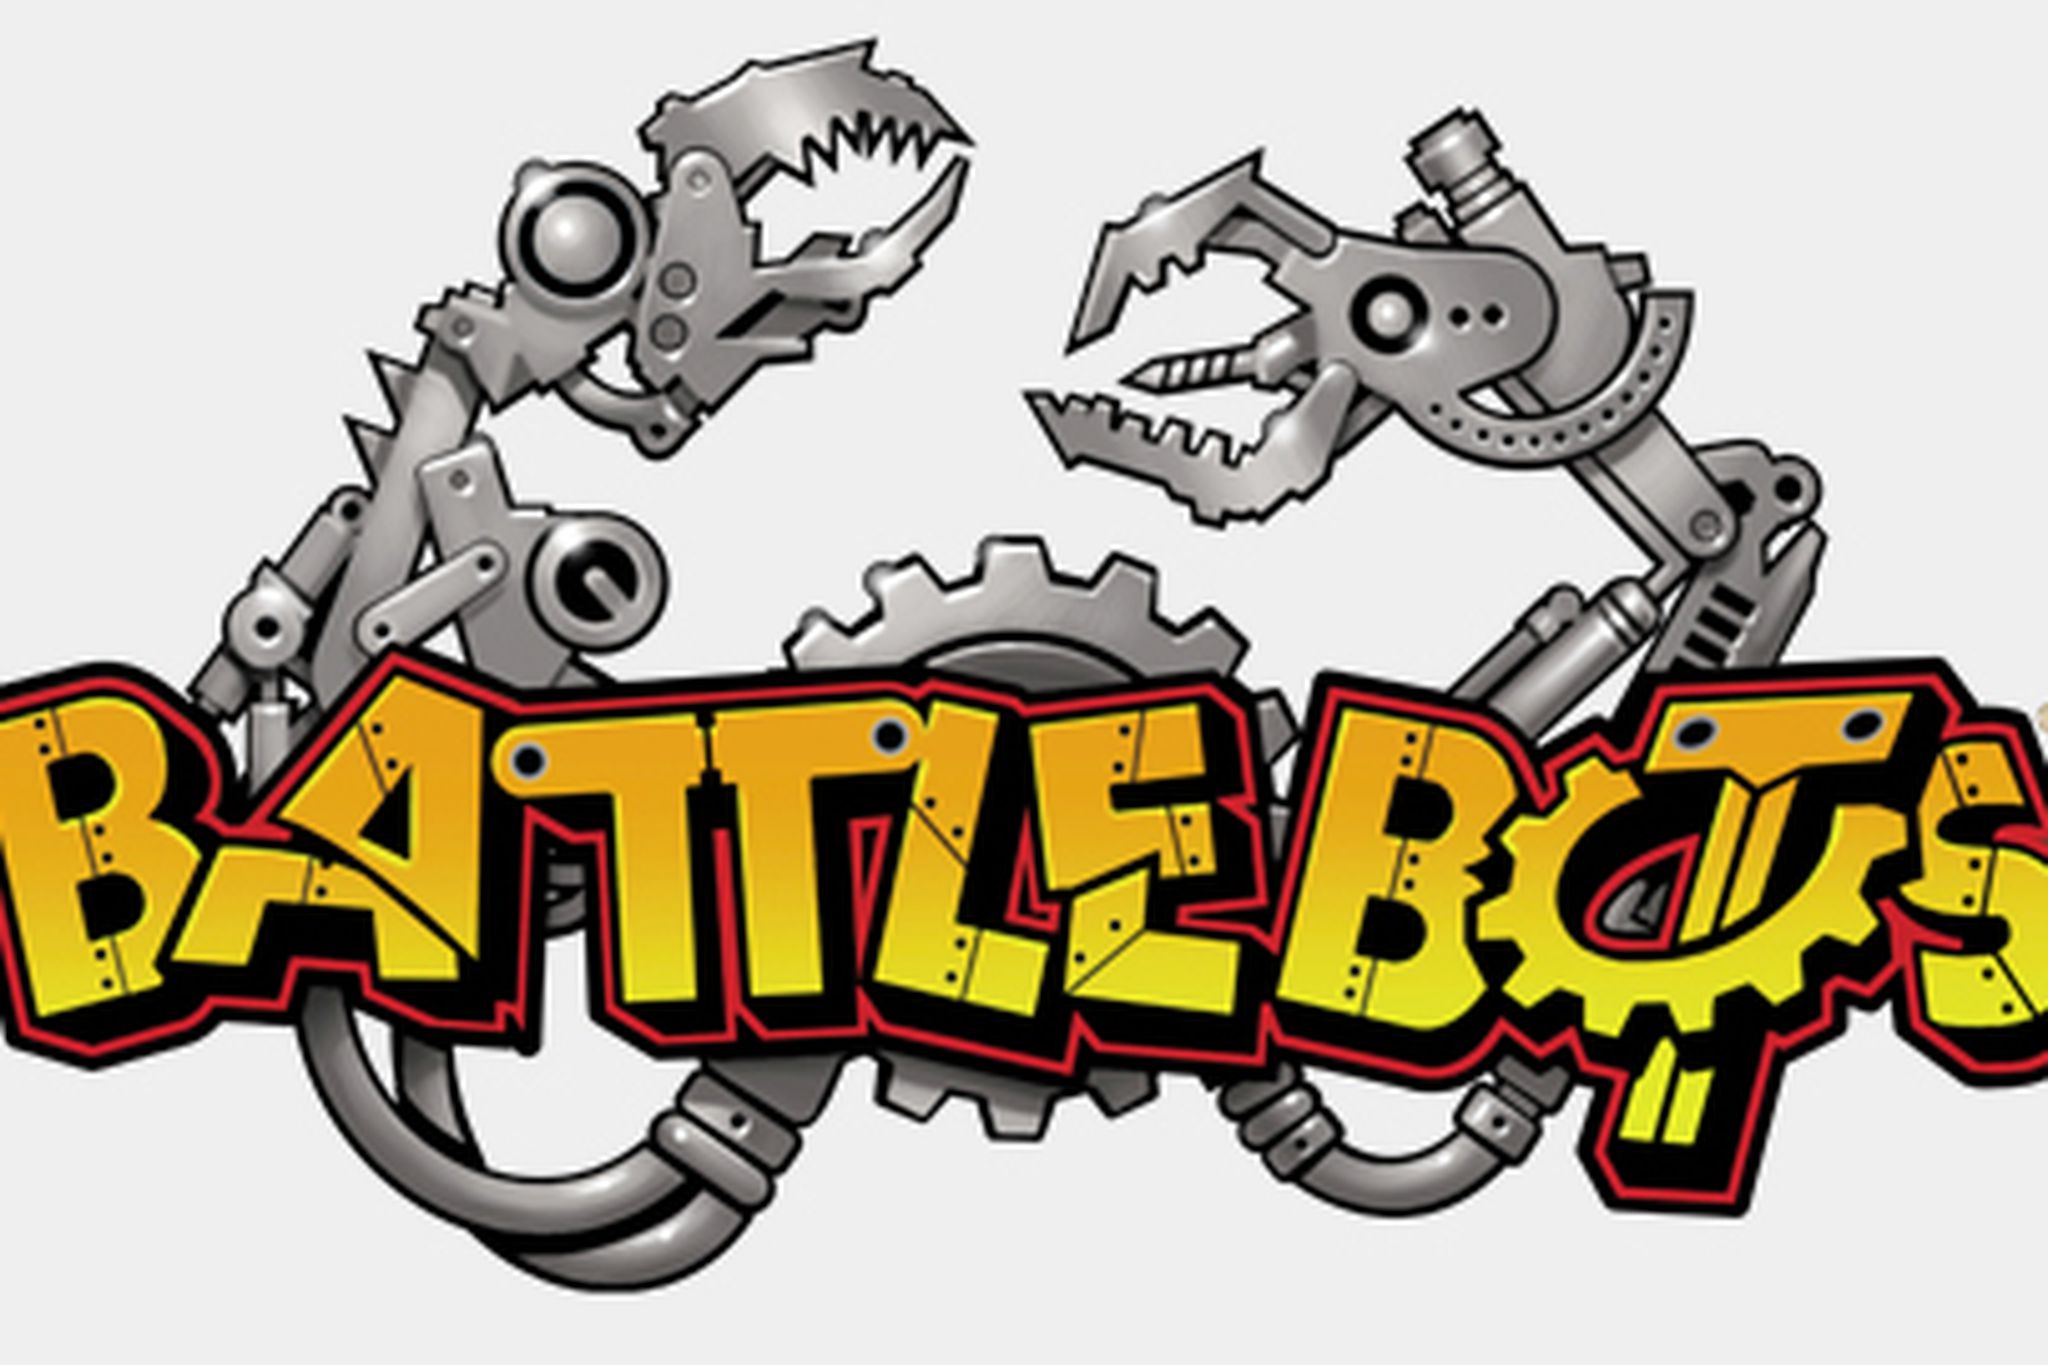 BattleBots will return this summer on ABC The Verge